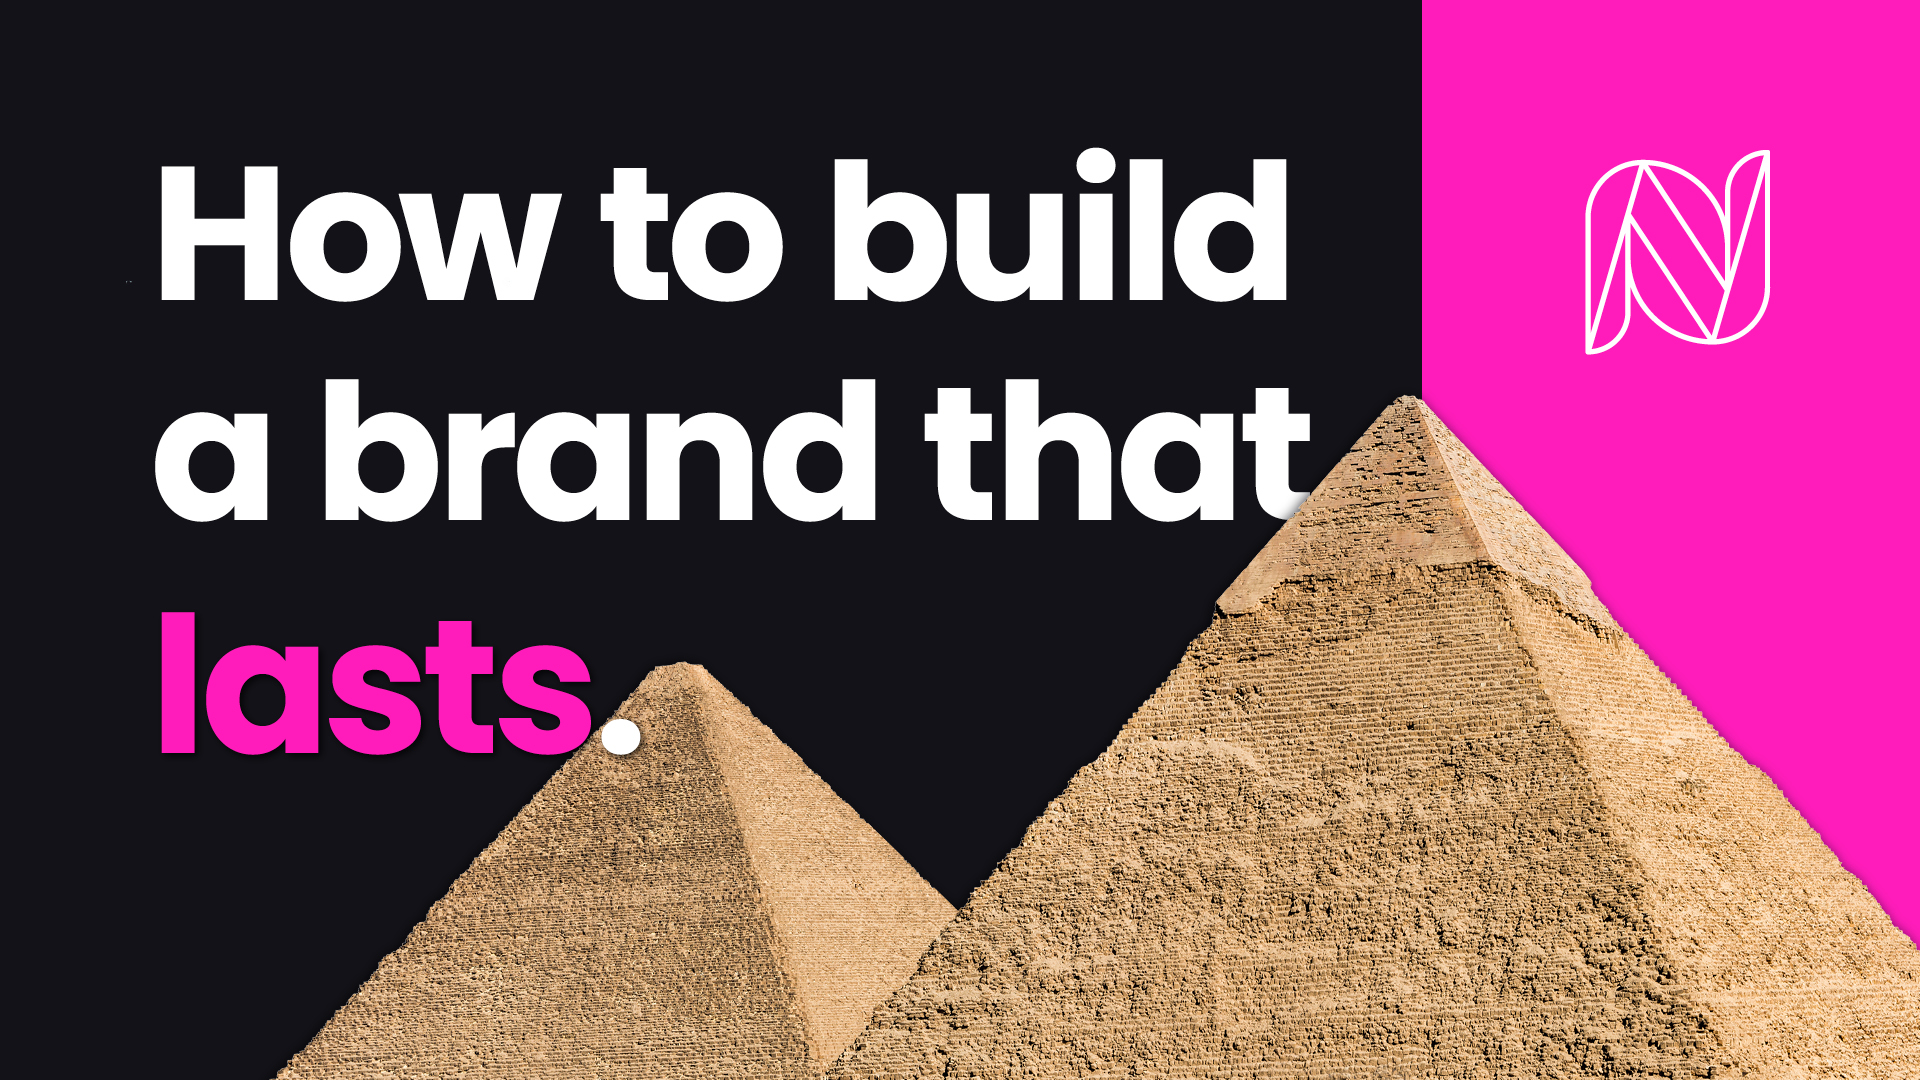 How to build a brand that lasts with Pyramids in the background